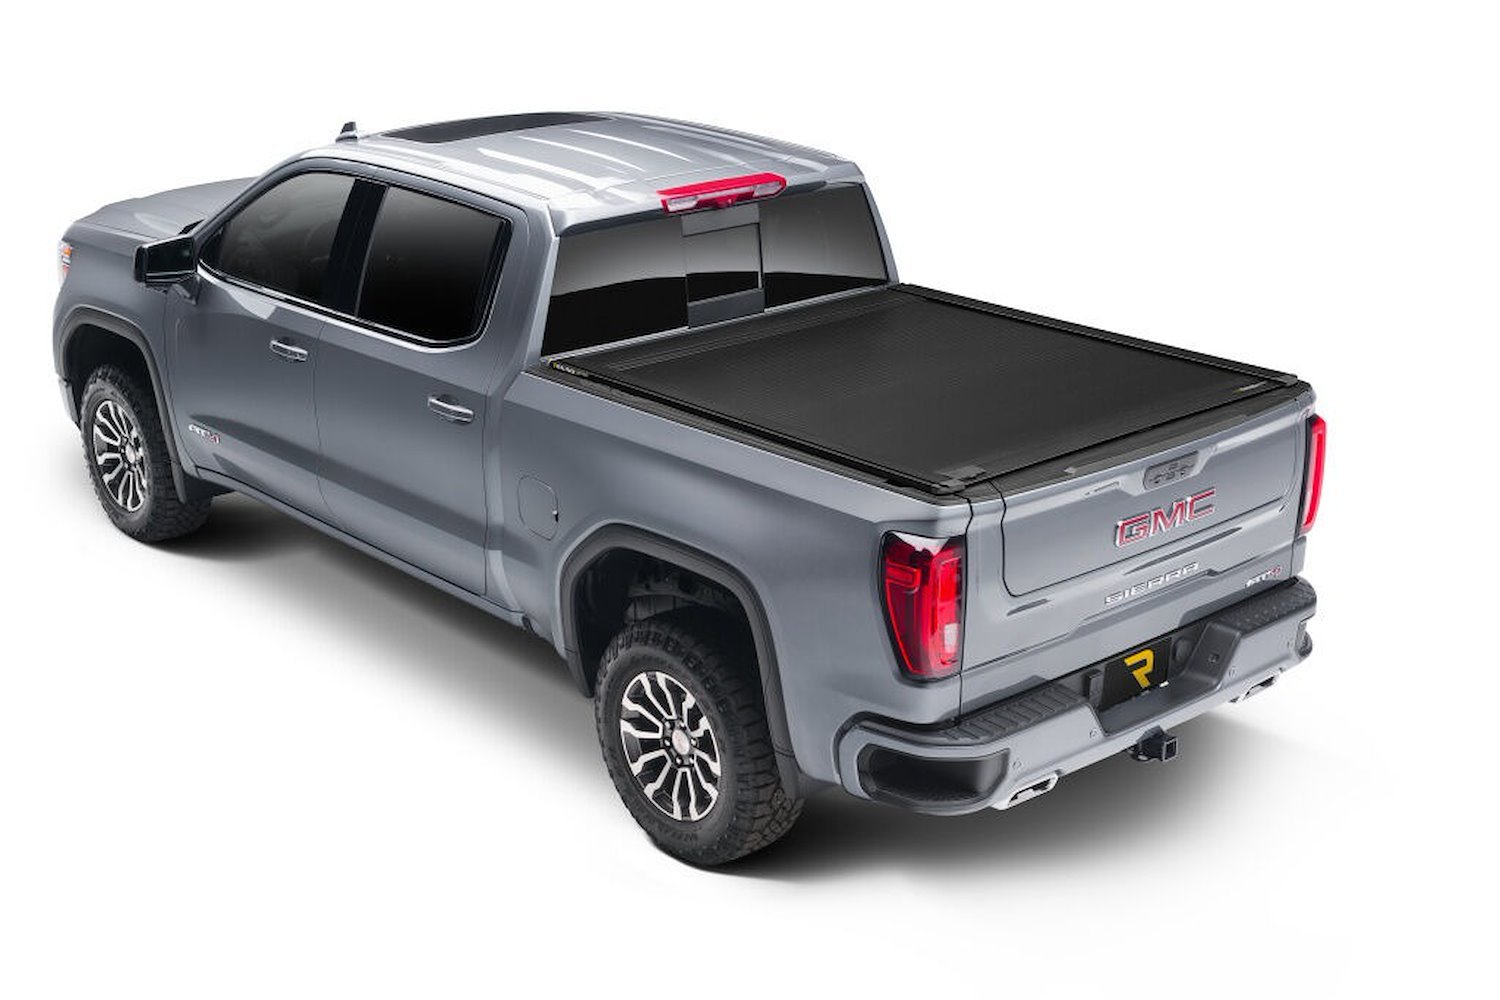 T-60481 RetraxOne XR Retractable Tonneau Cover Fits Select Chevy Silverado/GMC Sierra 5' 9" Bed without Stake Pockets